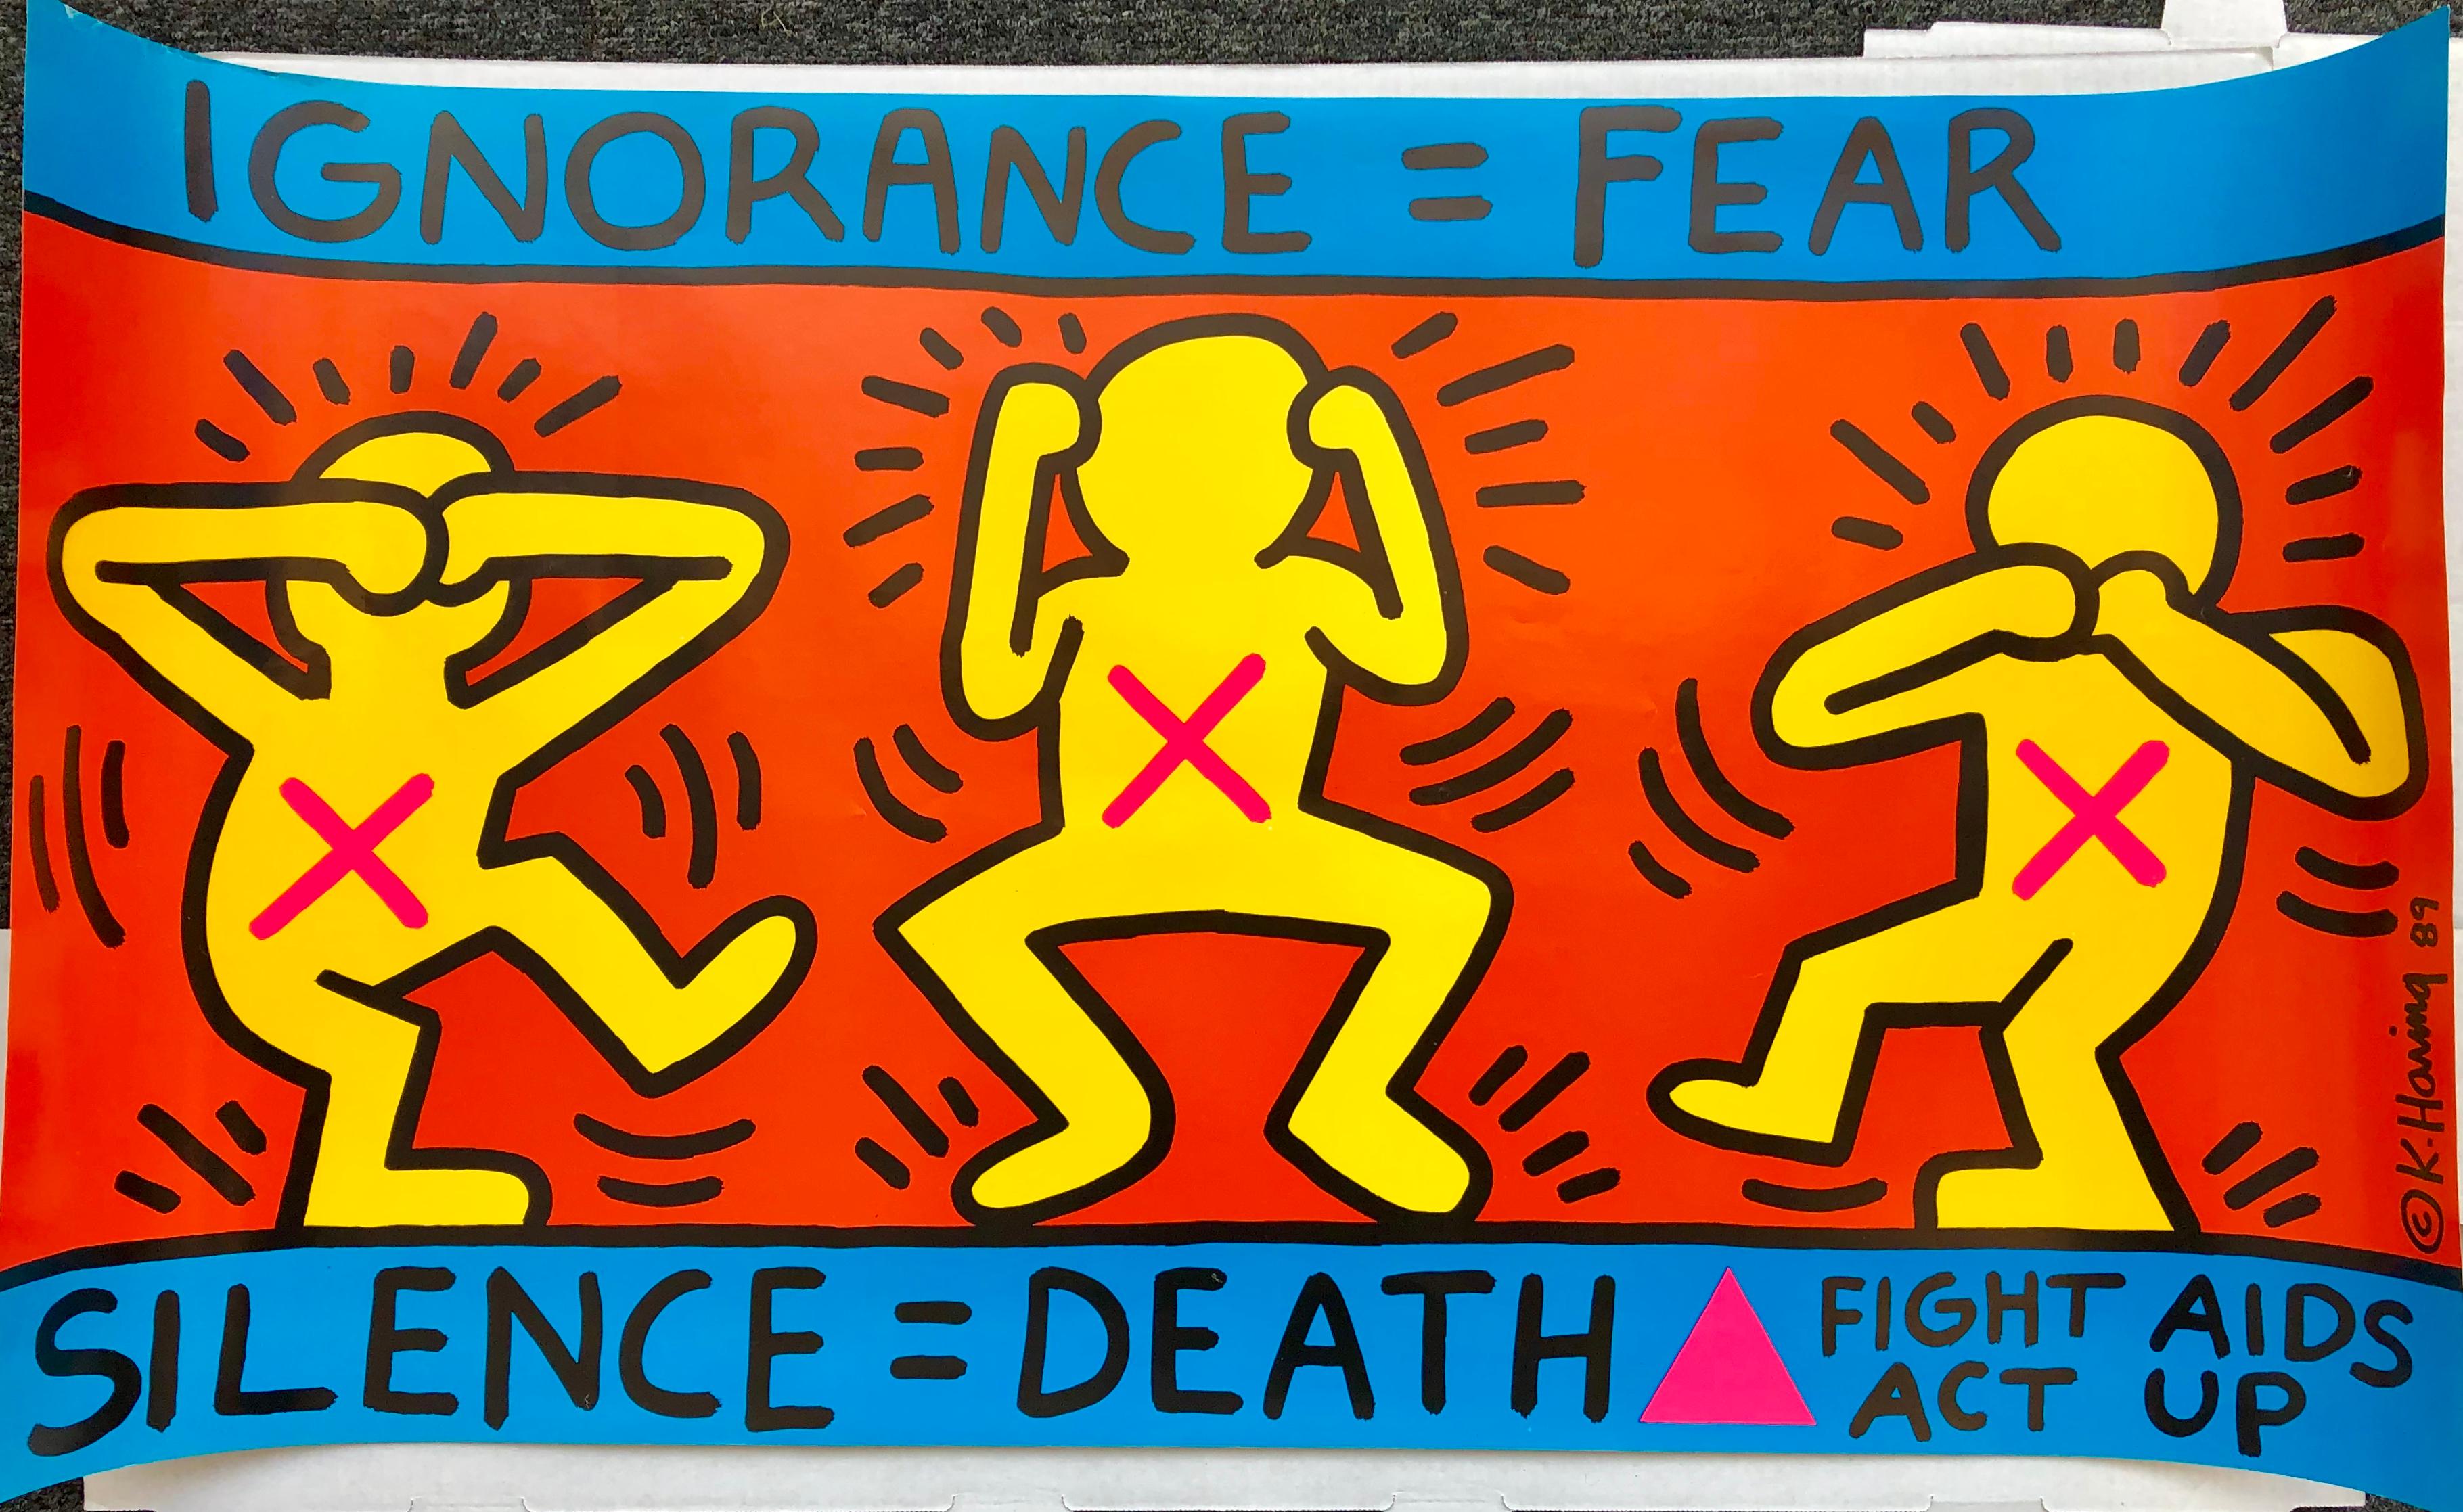 Keith Haring Ignorance = Fear, 1989 (Keith Haring ACT UP) 1